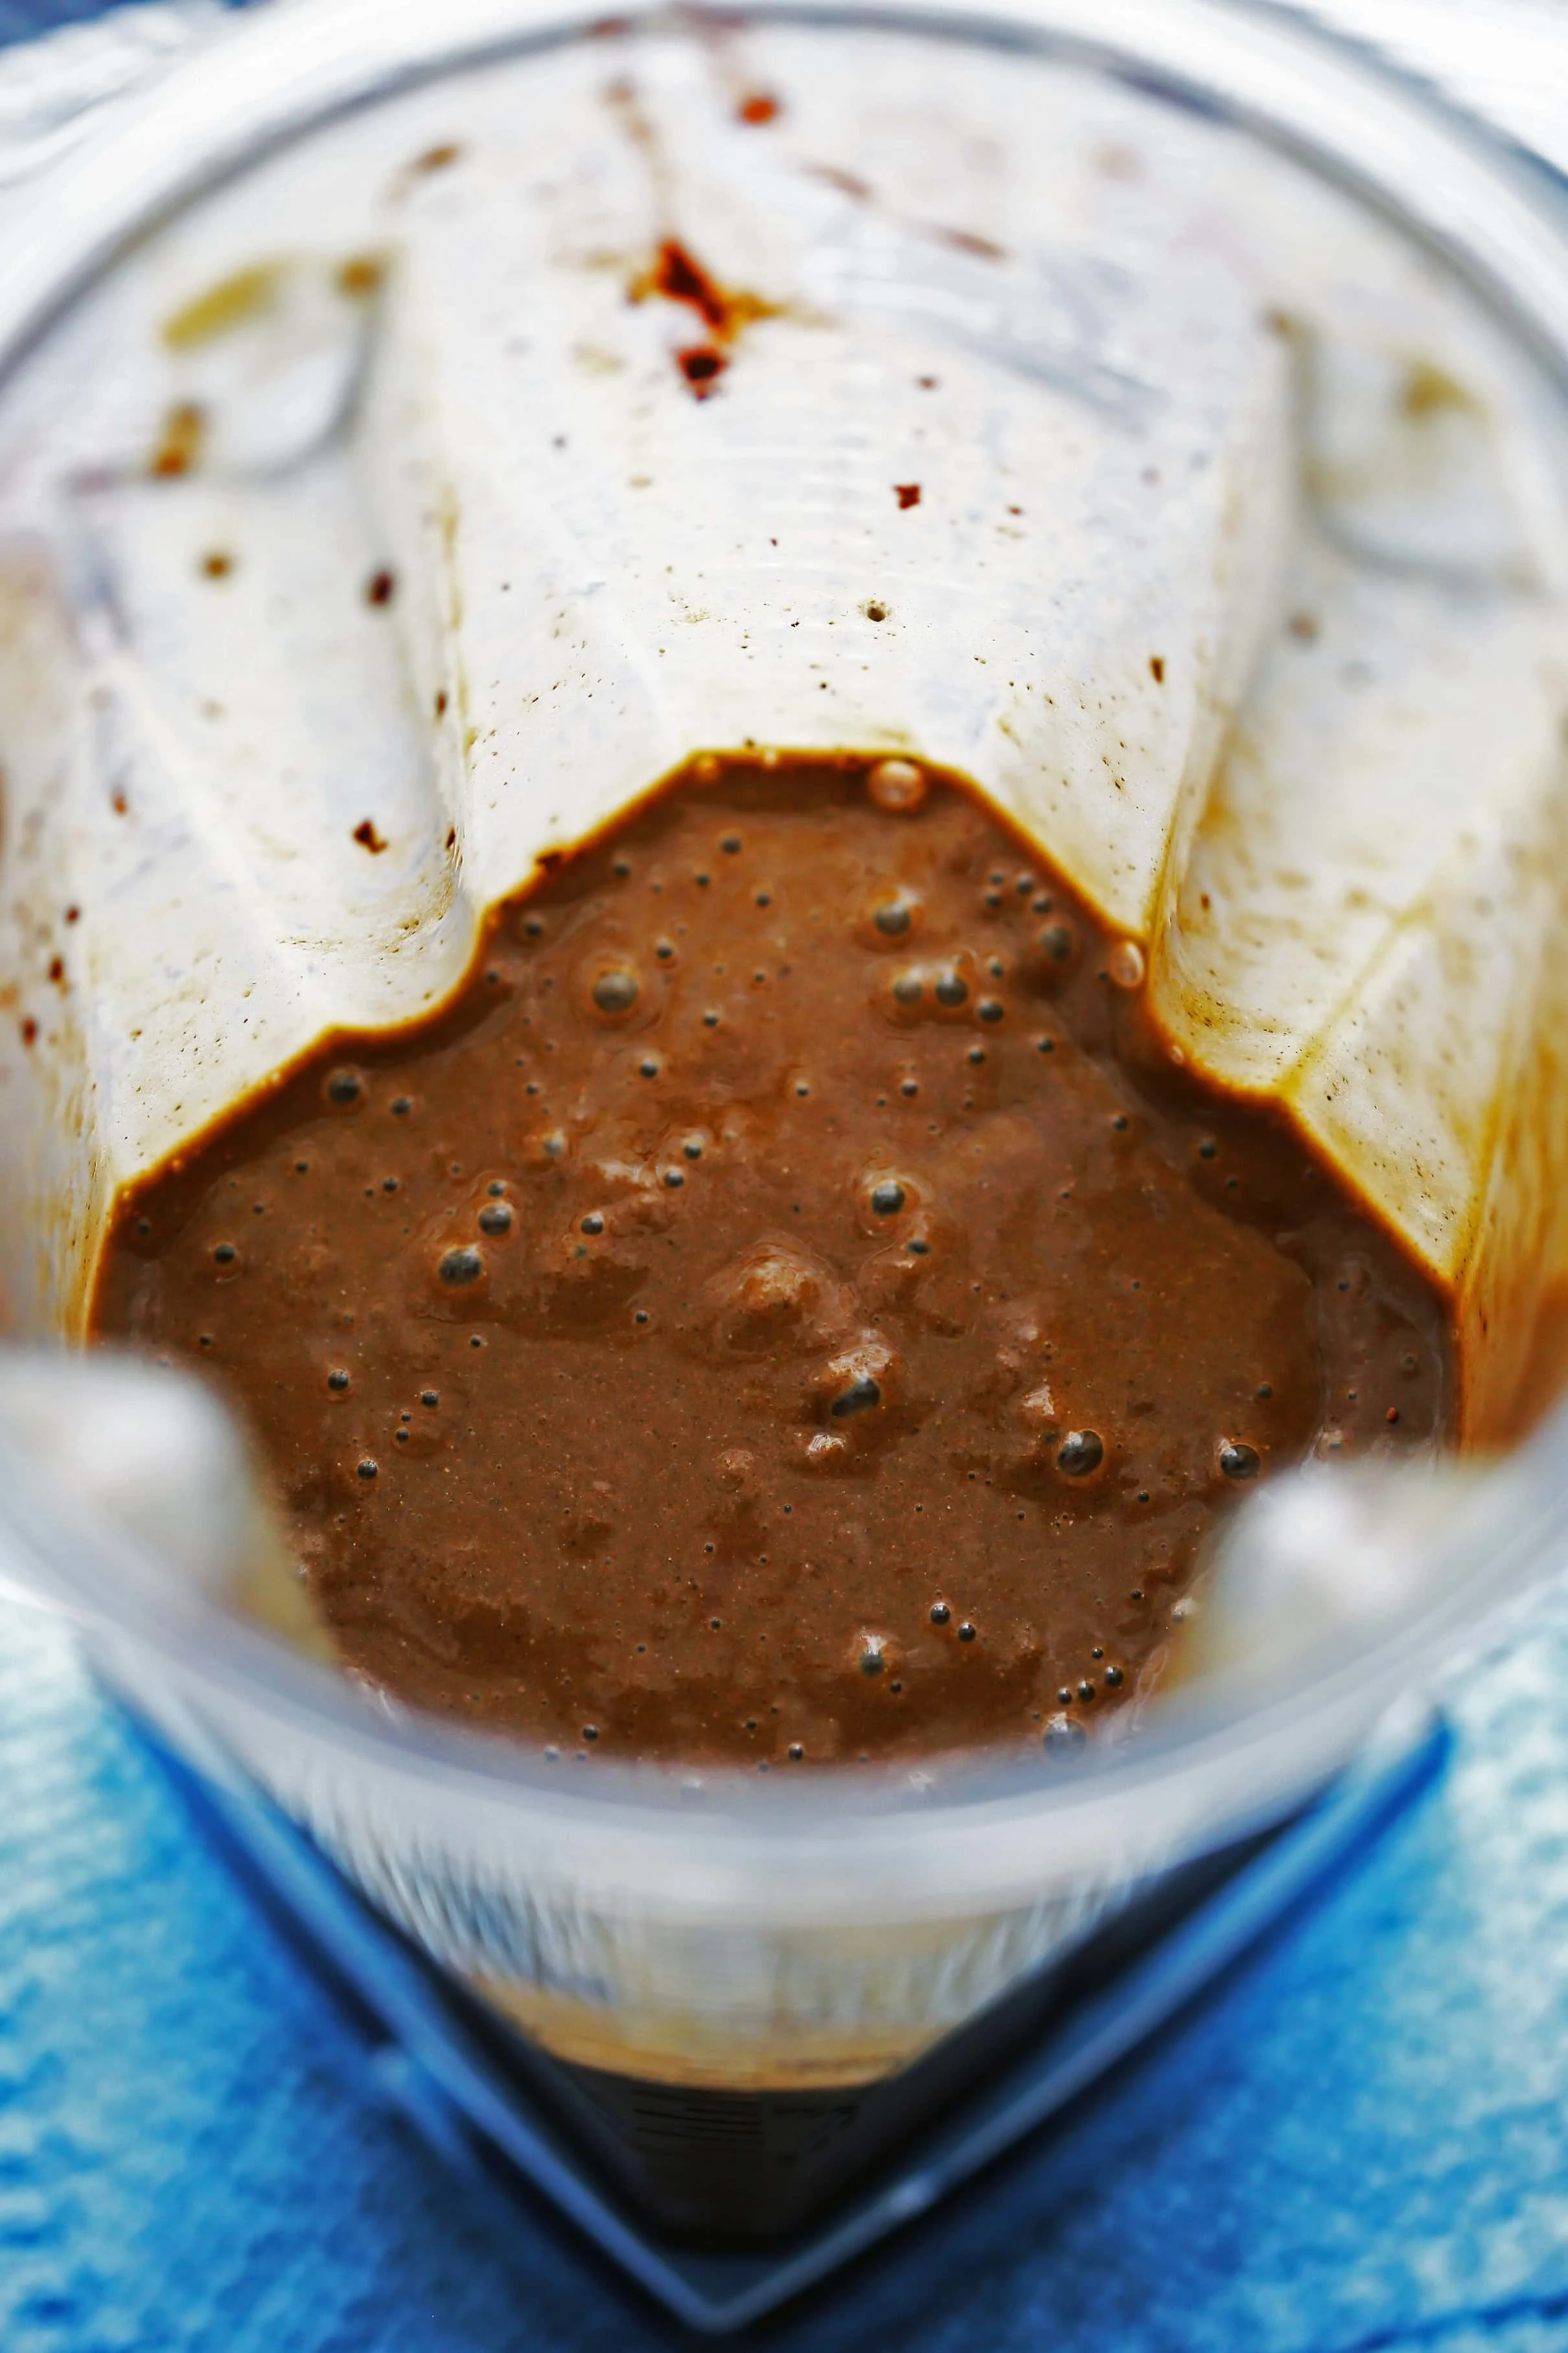 Healthy chocolate banana smoothie in a blender container.